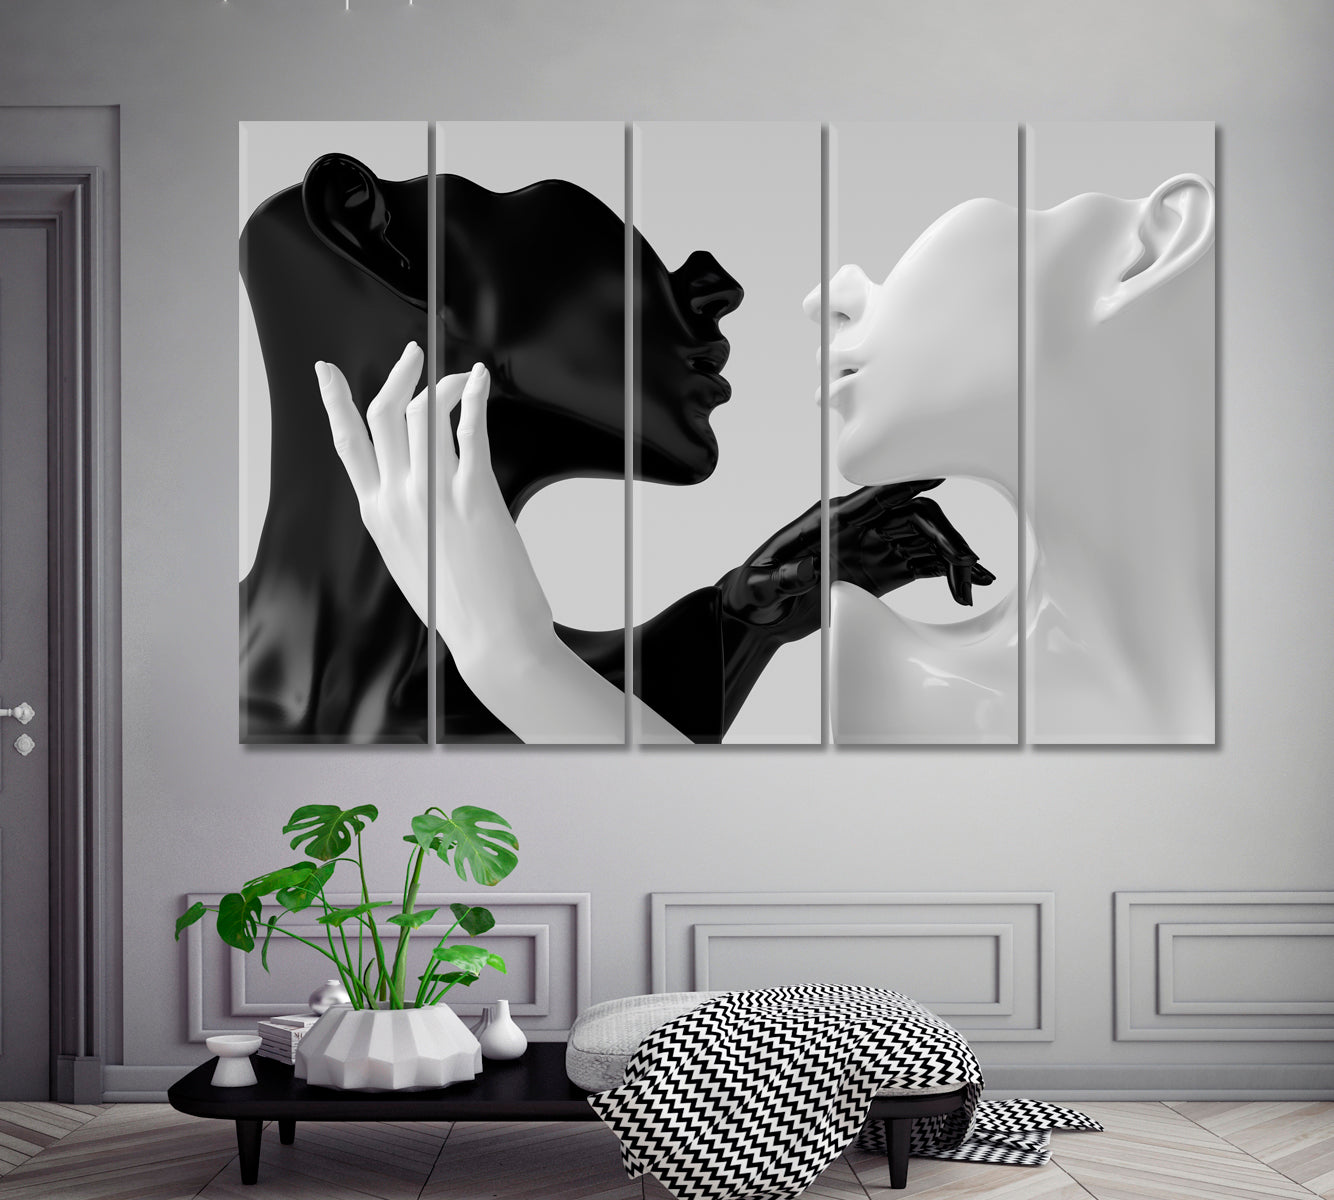 ABSTRACT ELEGANT Black and White Yin and Yang On Grey Black and White Wall Art Print Artesty 5 panels 36" x 24" 